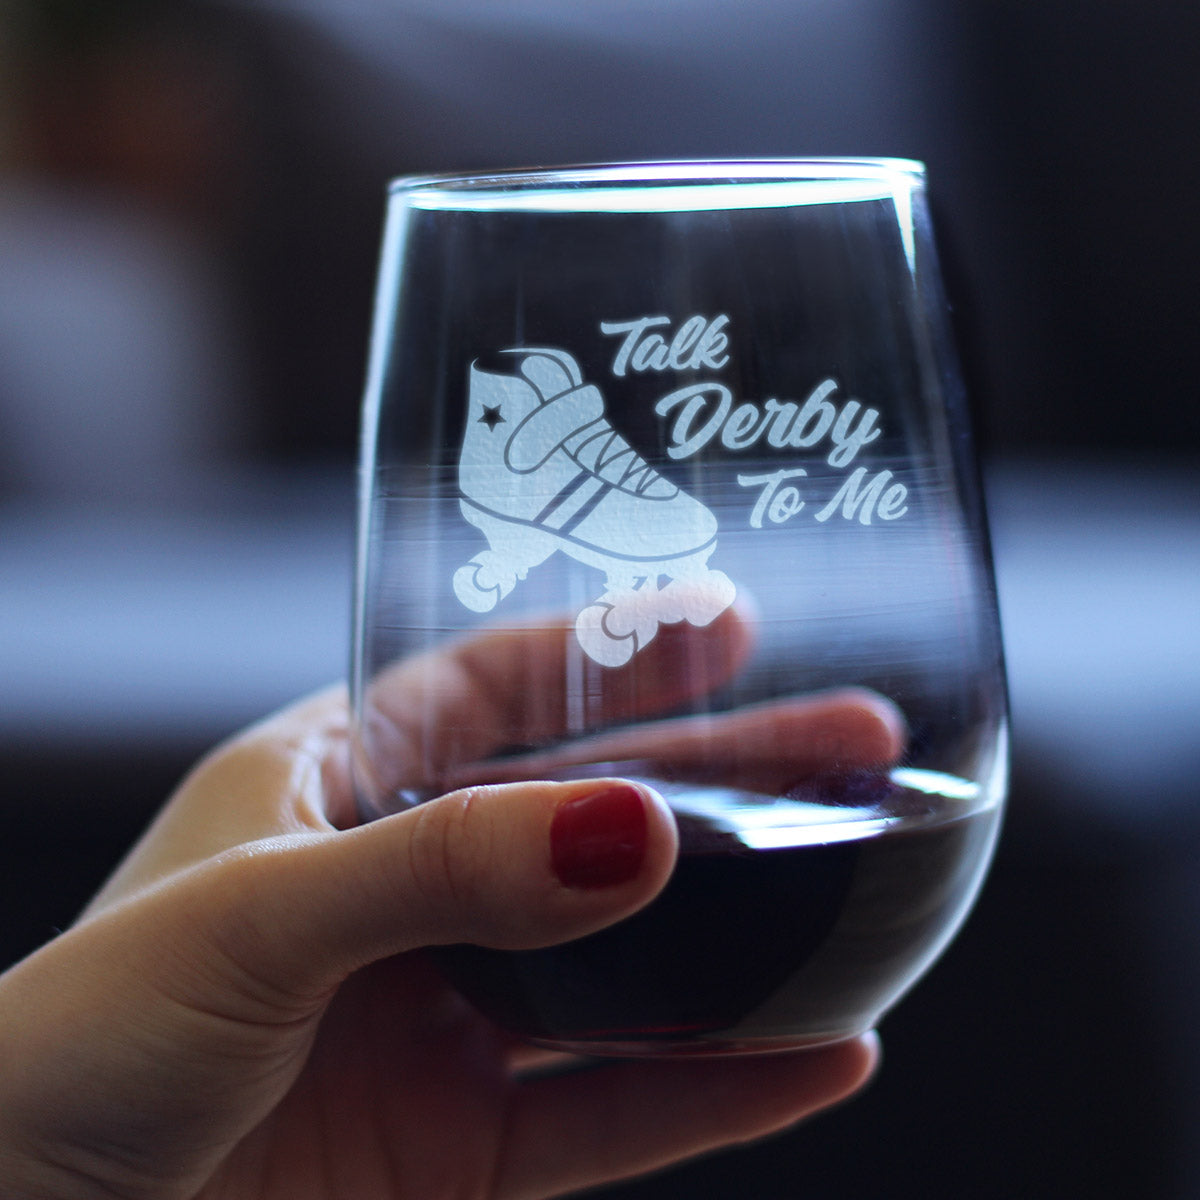 Talk Derby To Me - Stemless Wine Glass - Funny Rollerblading Gifts and Decor for Men &amp; Women - Large 17 oz Glasses